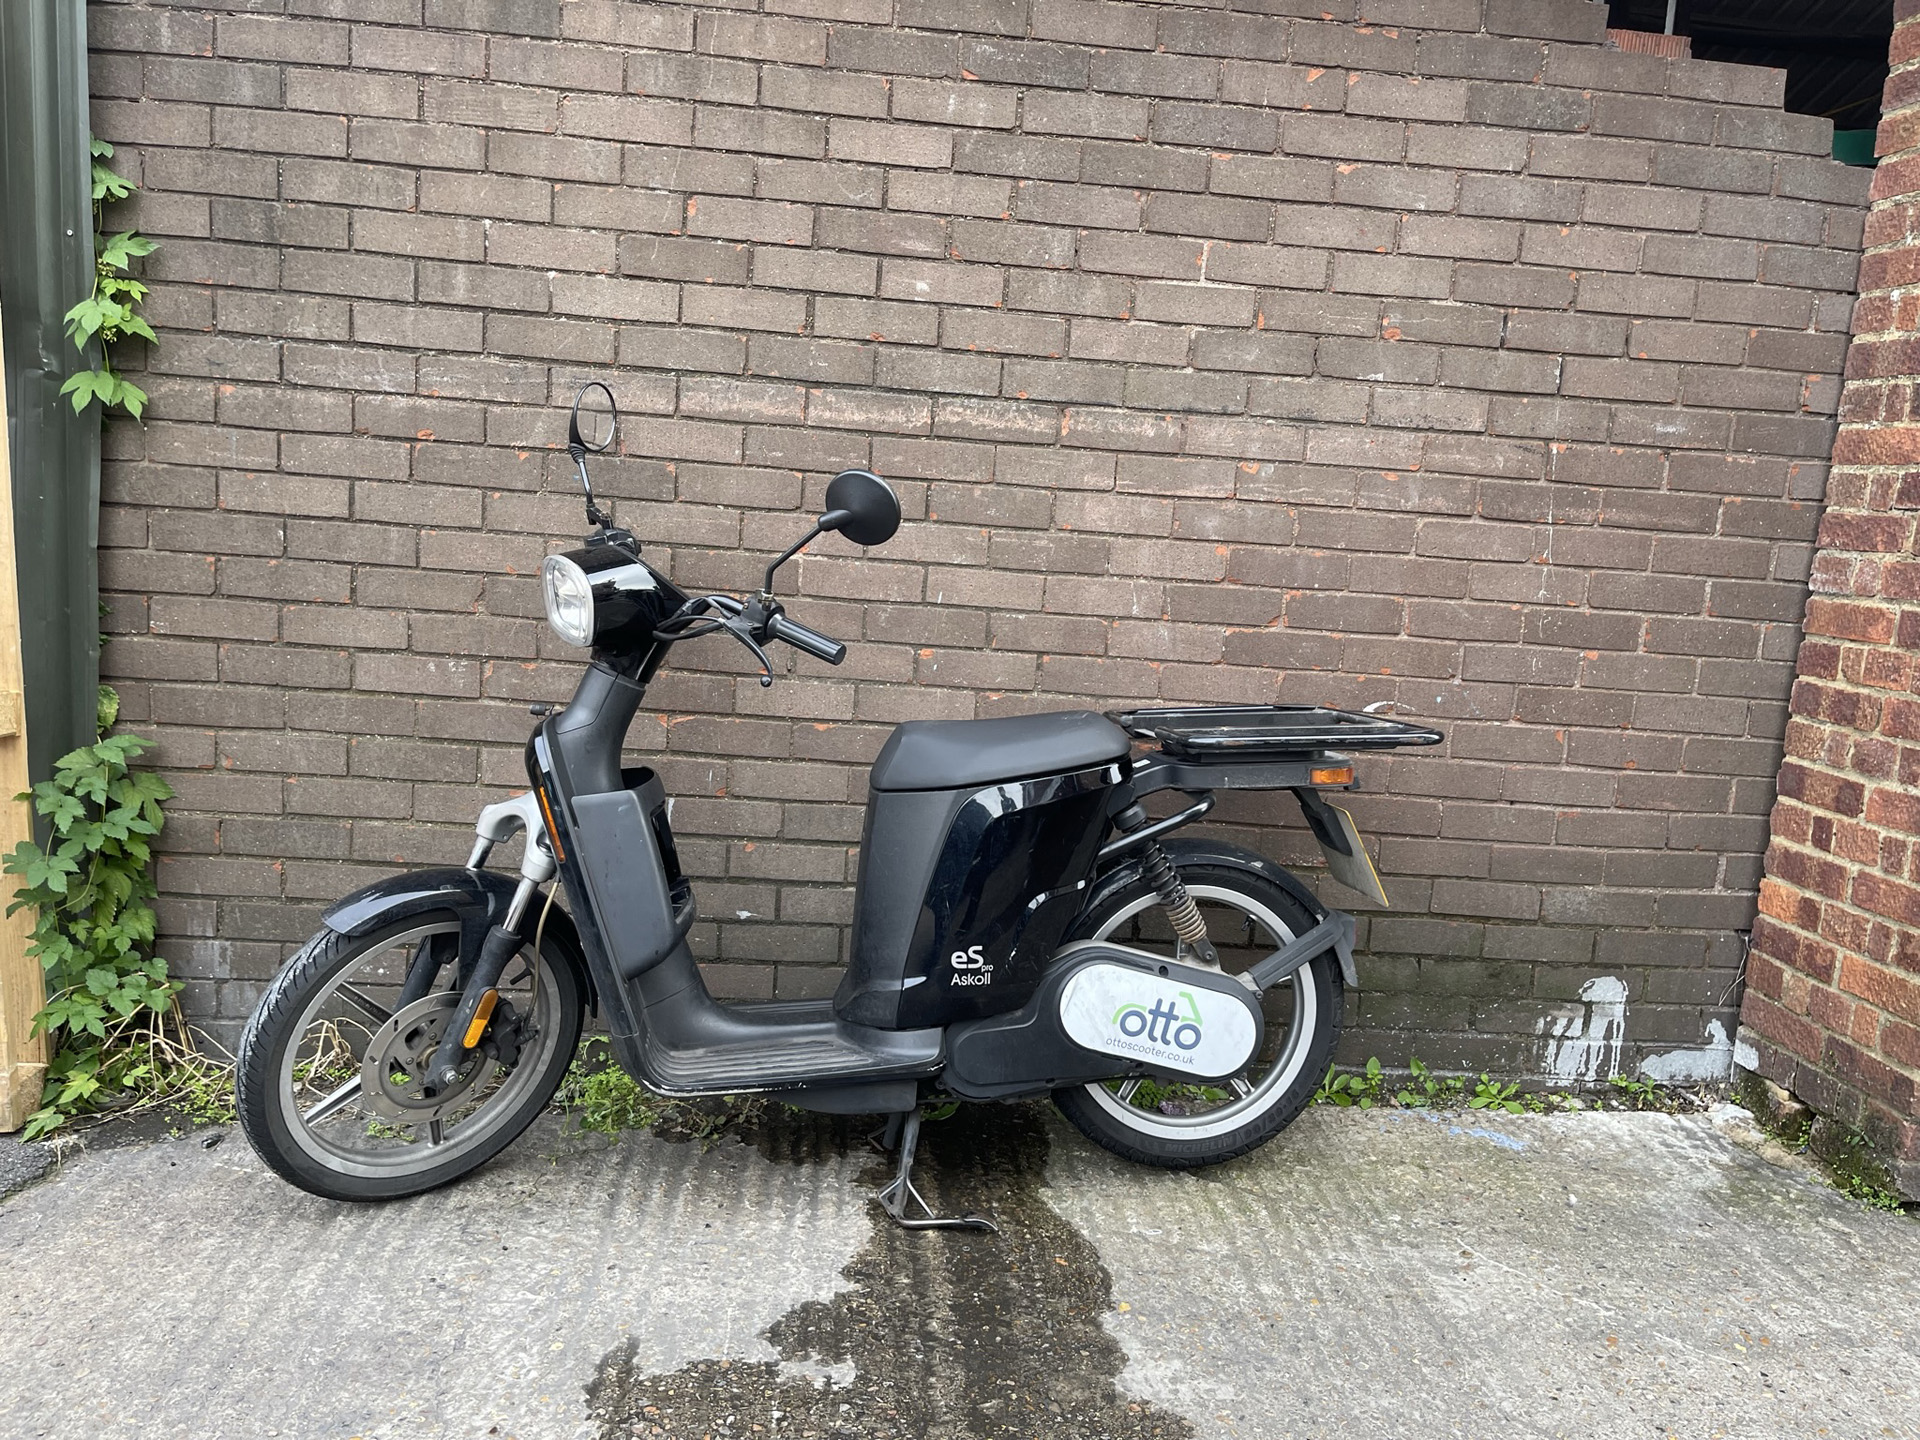 Askoll eSpro 70 in black, electric scooter review 2023